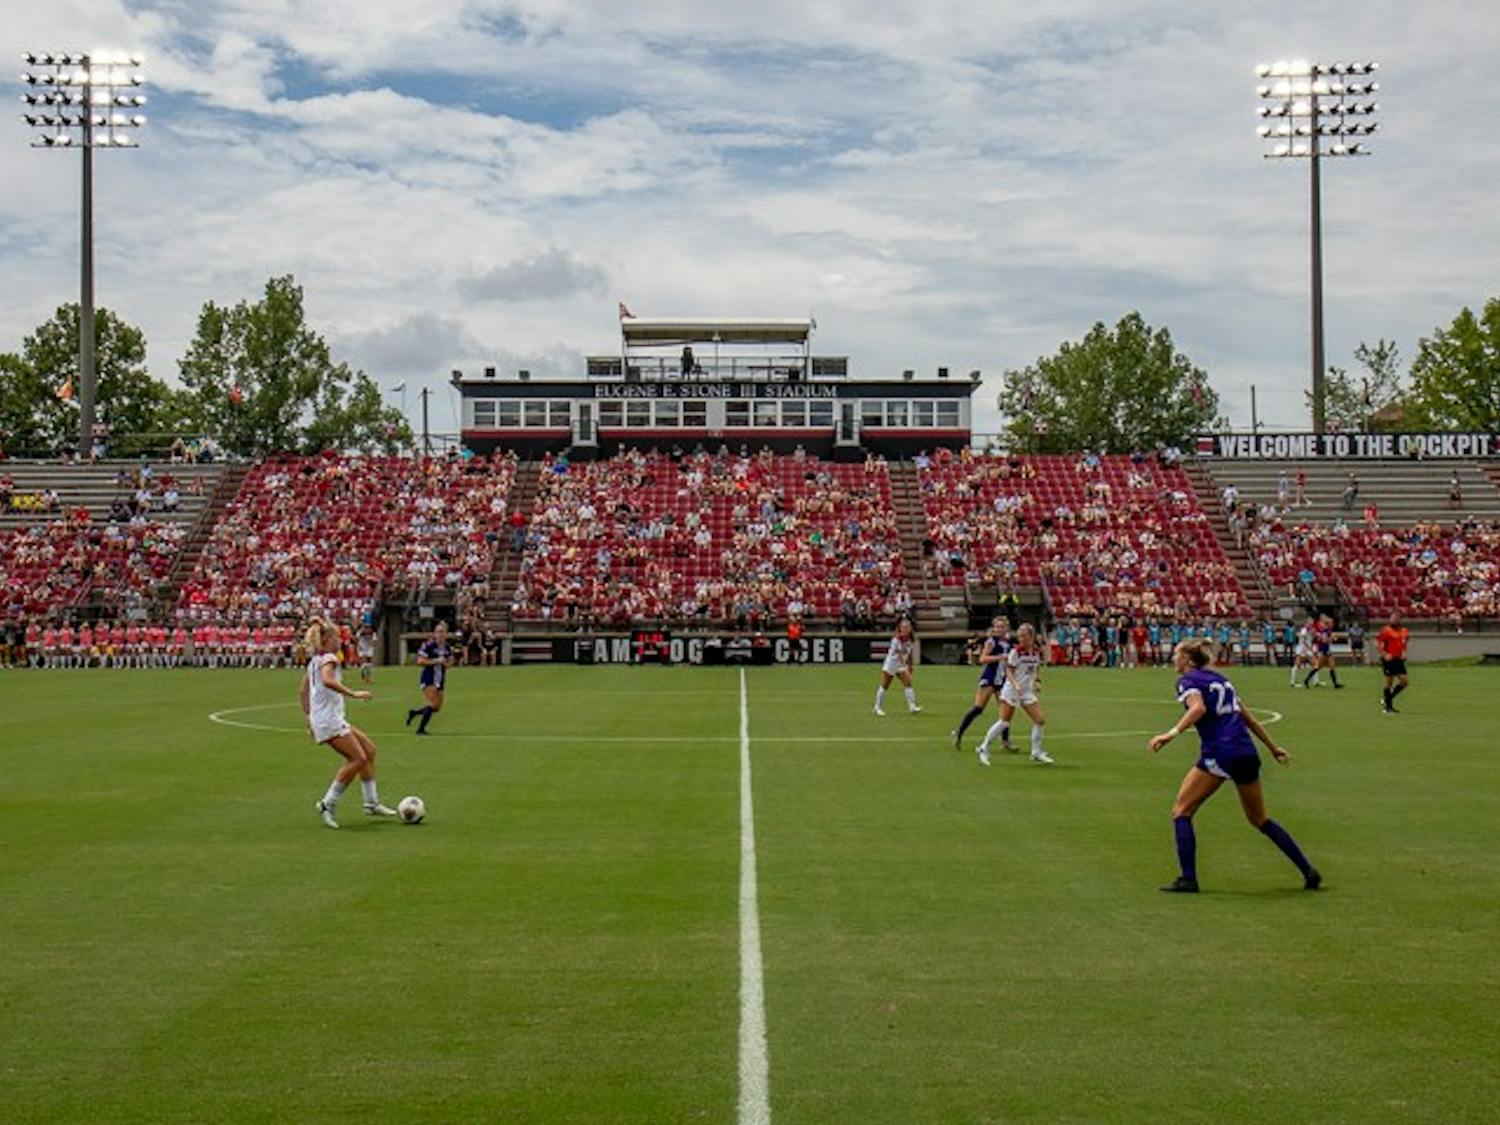 The South Carolina women's soccer team moves the ball along the midfield line during its game against East Carolina on August 21, 2022. The Gamecocks beat the pirates 2-0.